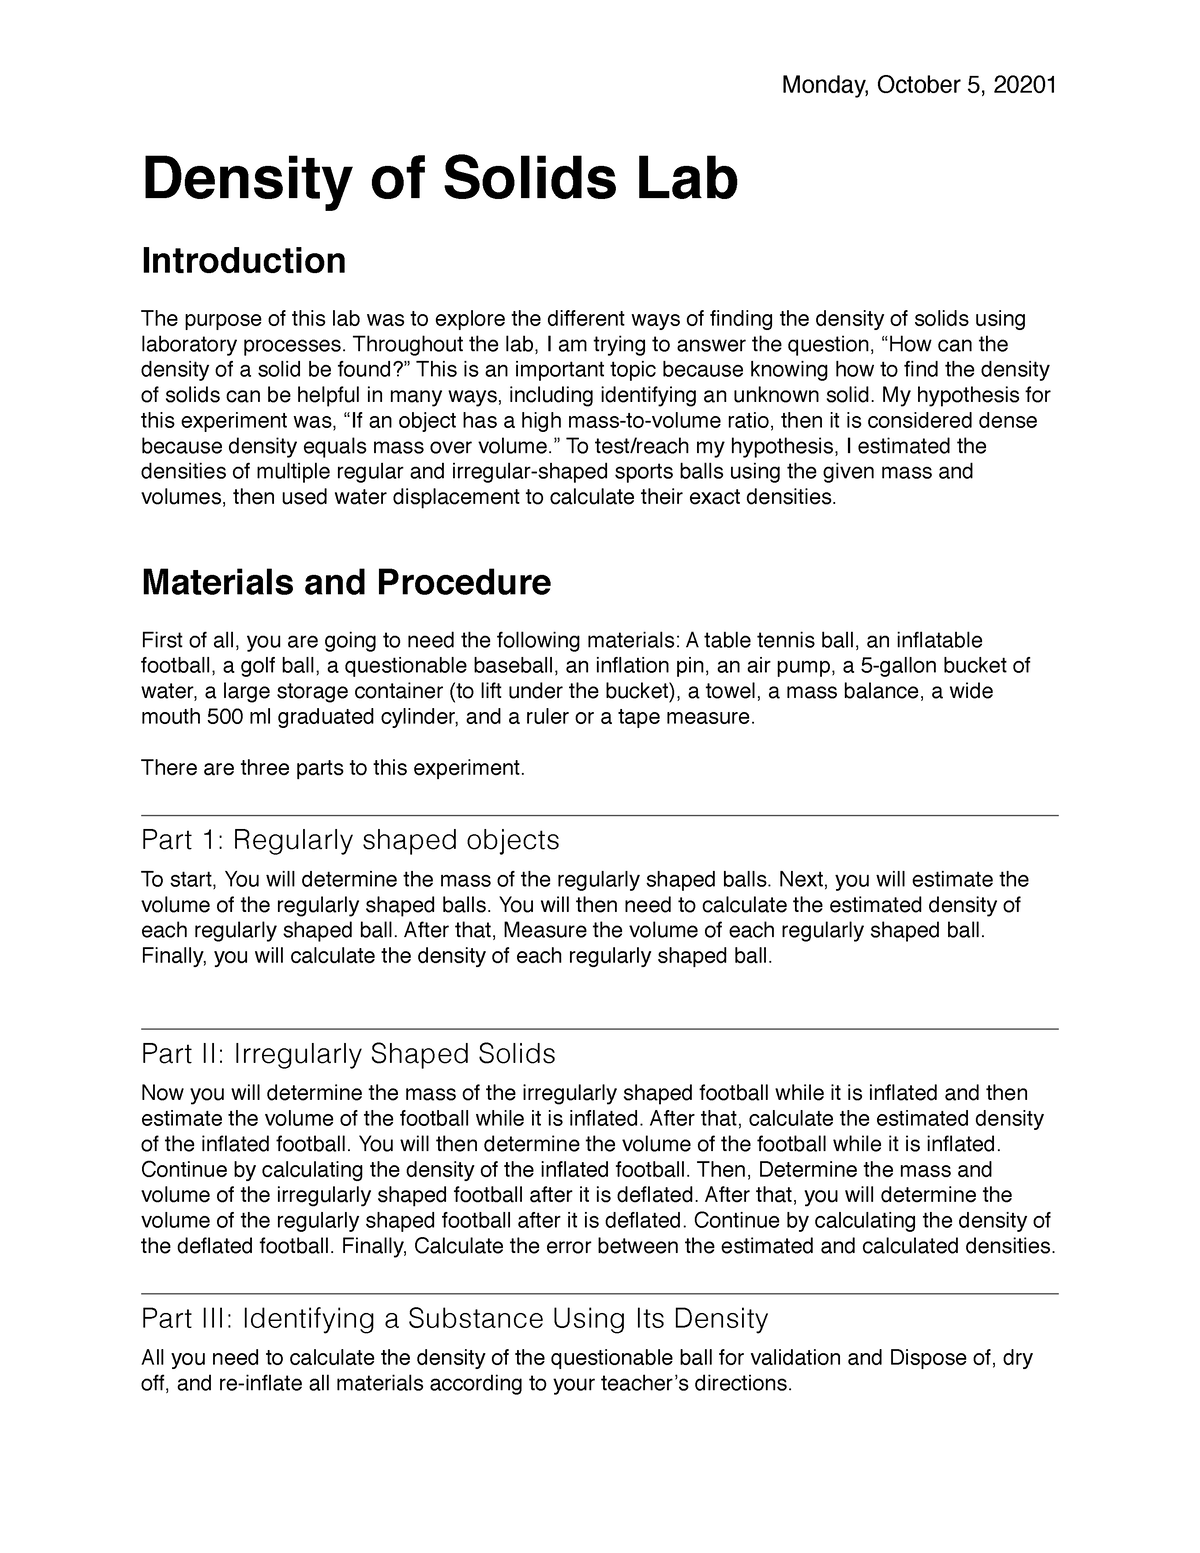 lab density of solids assignment lab report quizlet